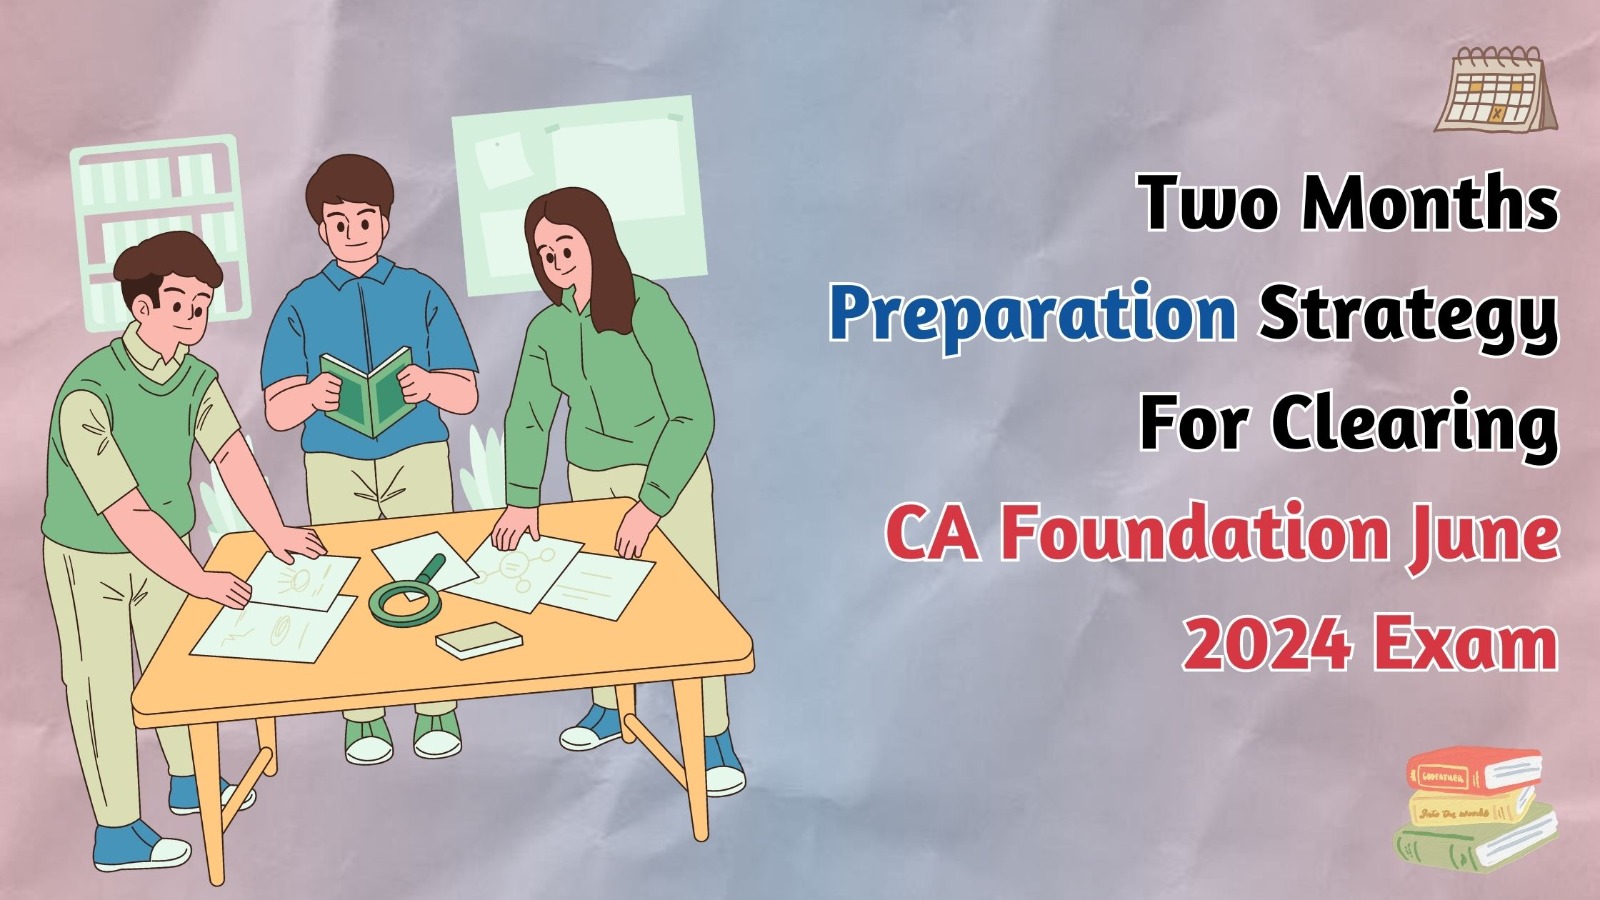 Two months preparation strategy for clearing CA Foundation June 2024 exam - Bhagya Achievers